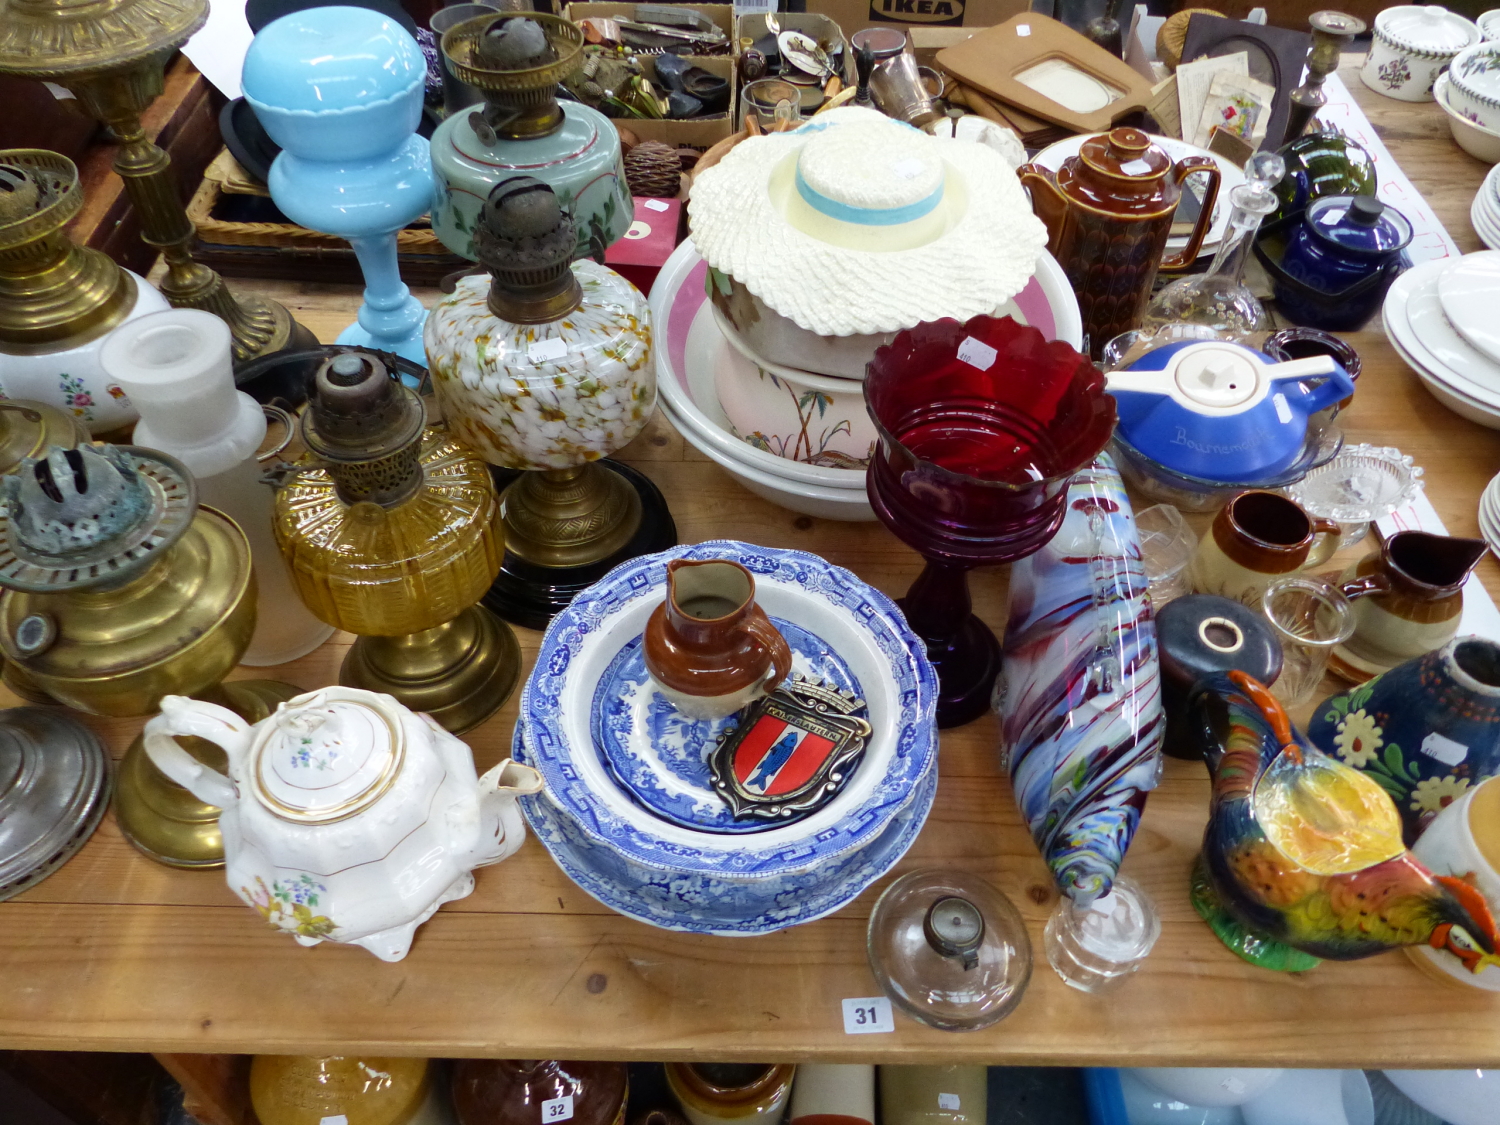 8 VARIOUS ANTIQUE AND LATER OIL LAMPS, OPAQUE GLASS SHADES,WASHBOWLS, 2 B & W STANDS, GLASS FISH,